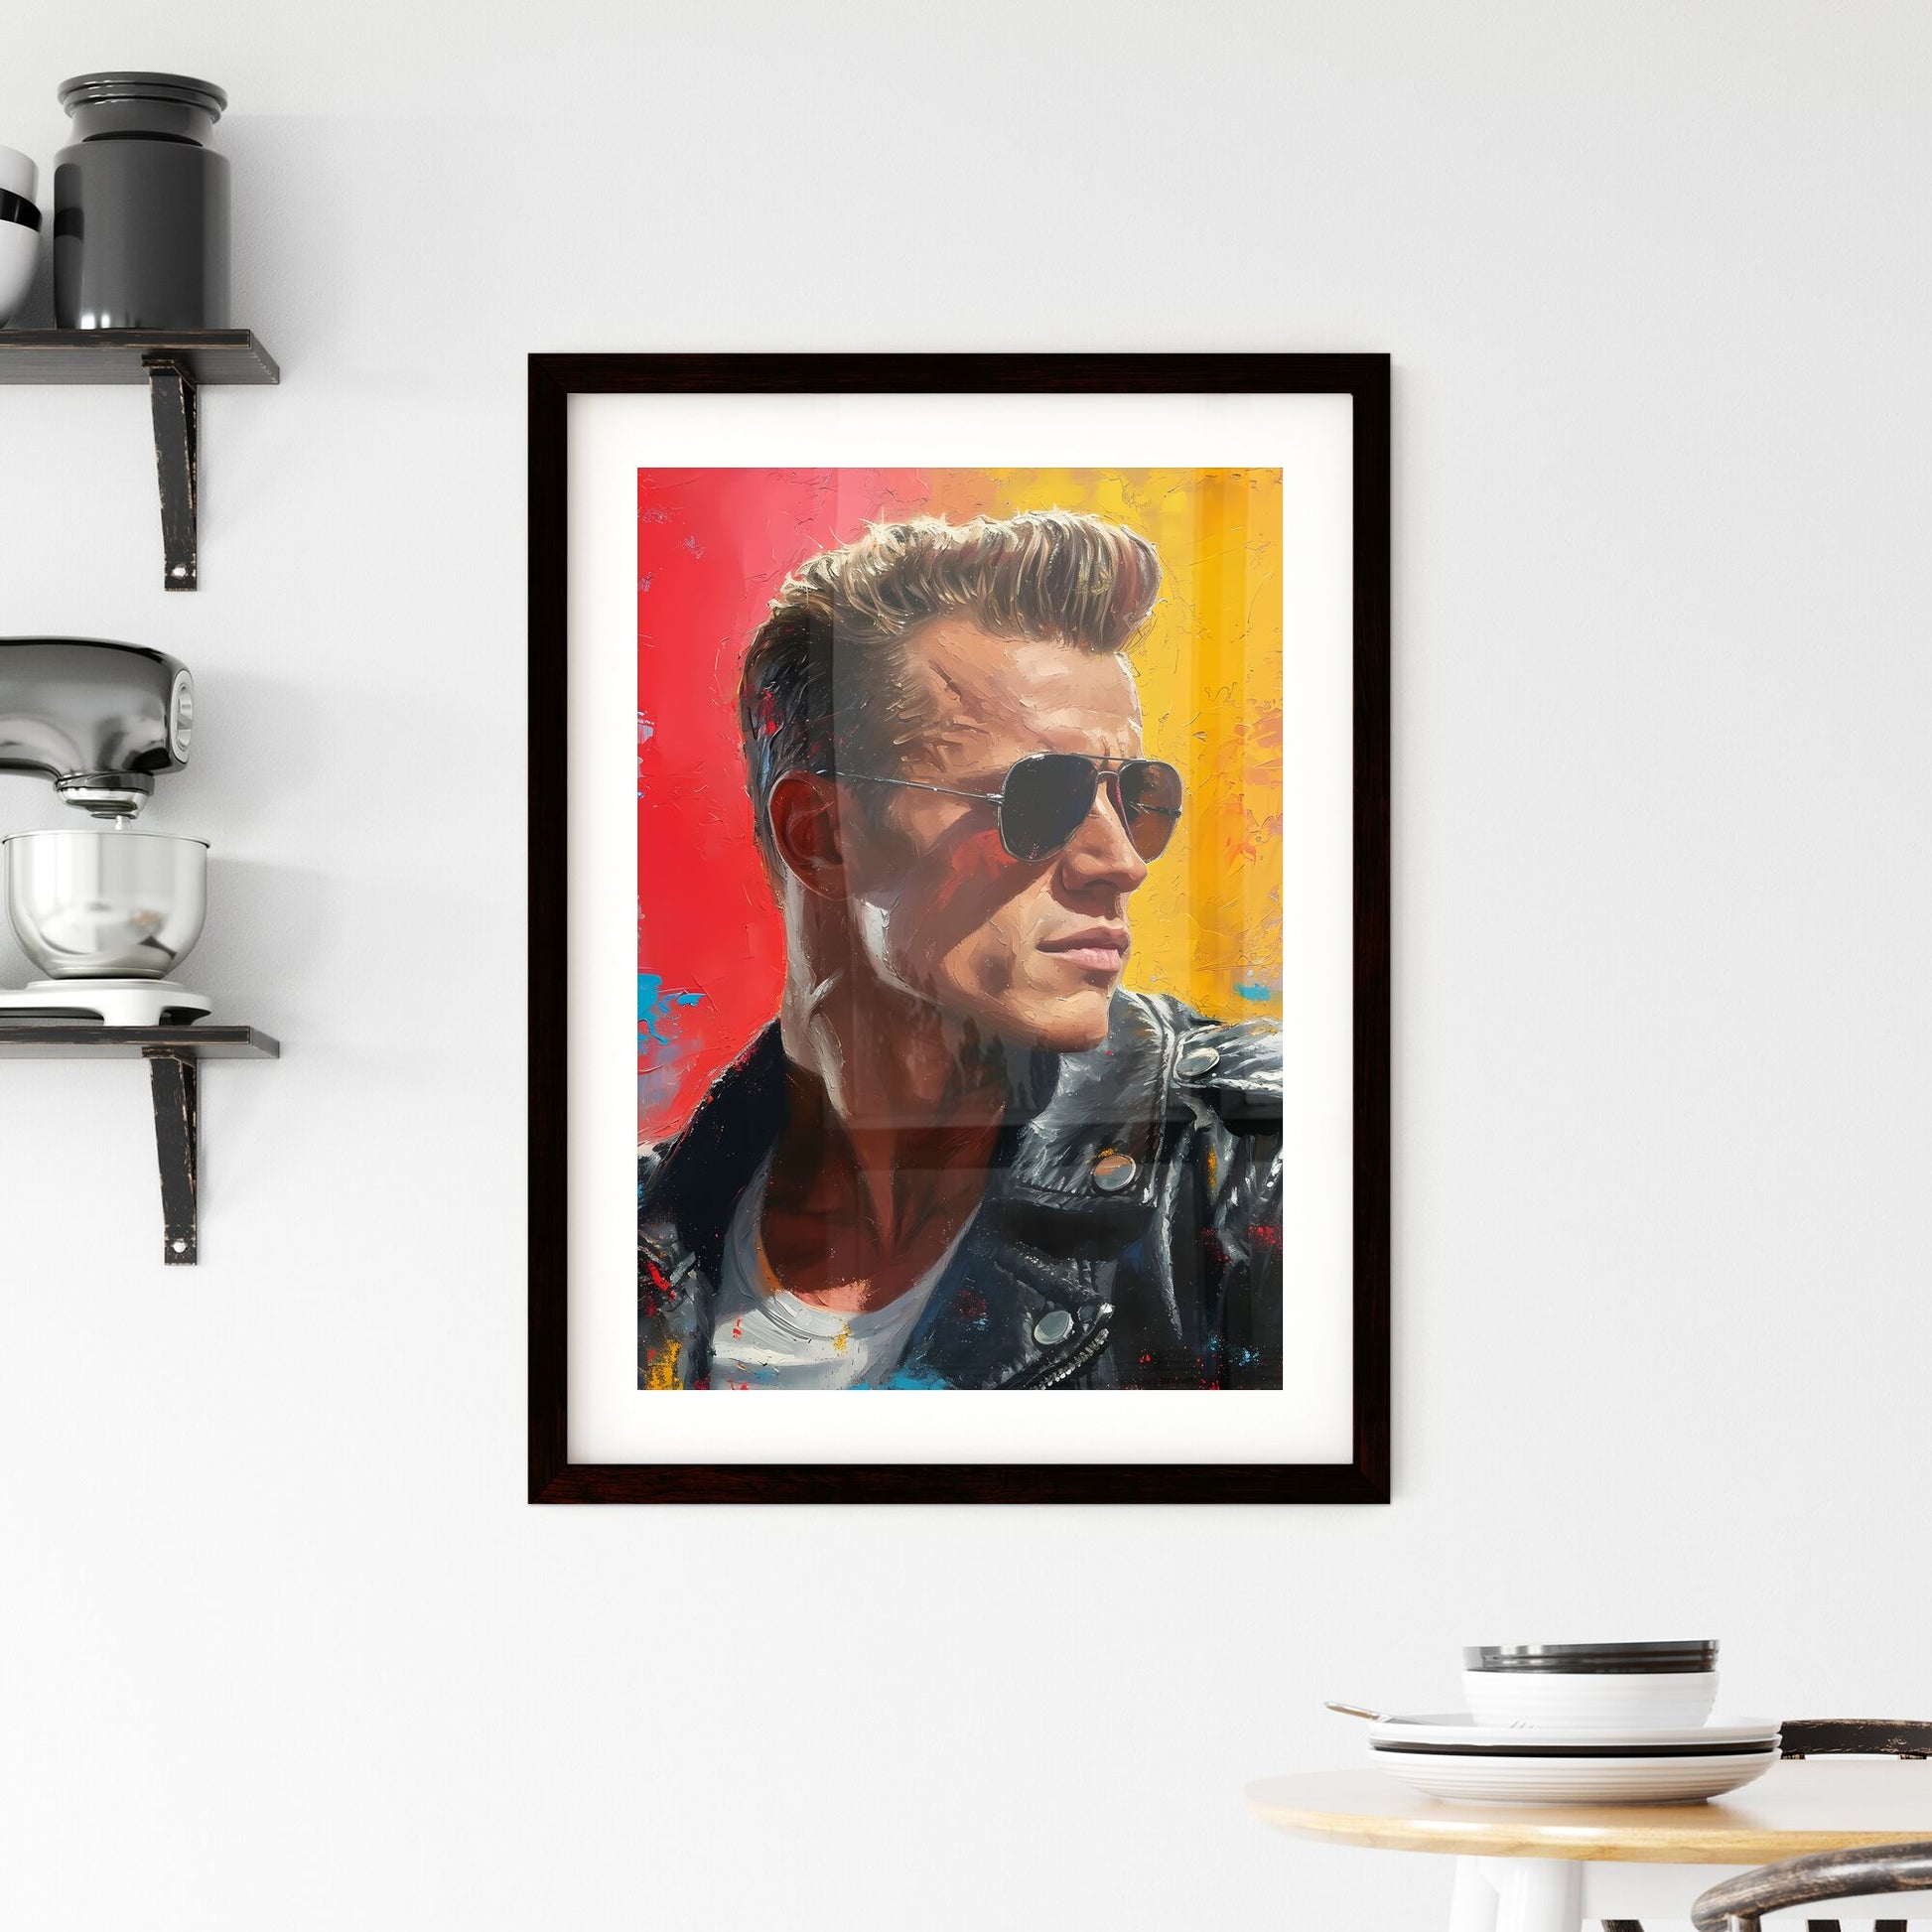 A Poster of The Terminator Portrait with colorful Background - A Man Wearing Sunglasses And A Leather Jacket Default Title